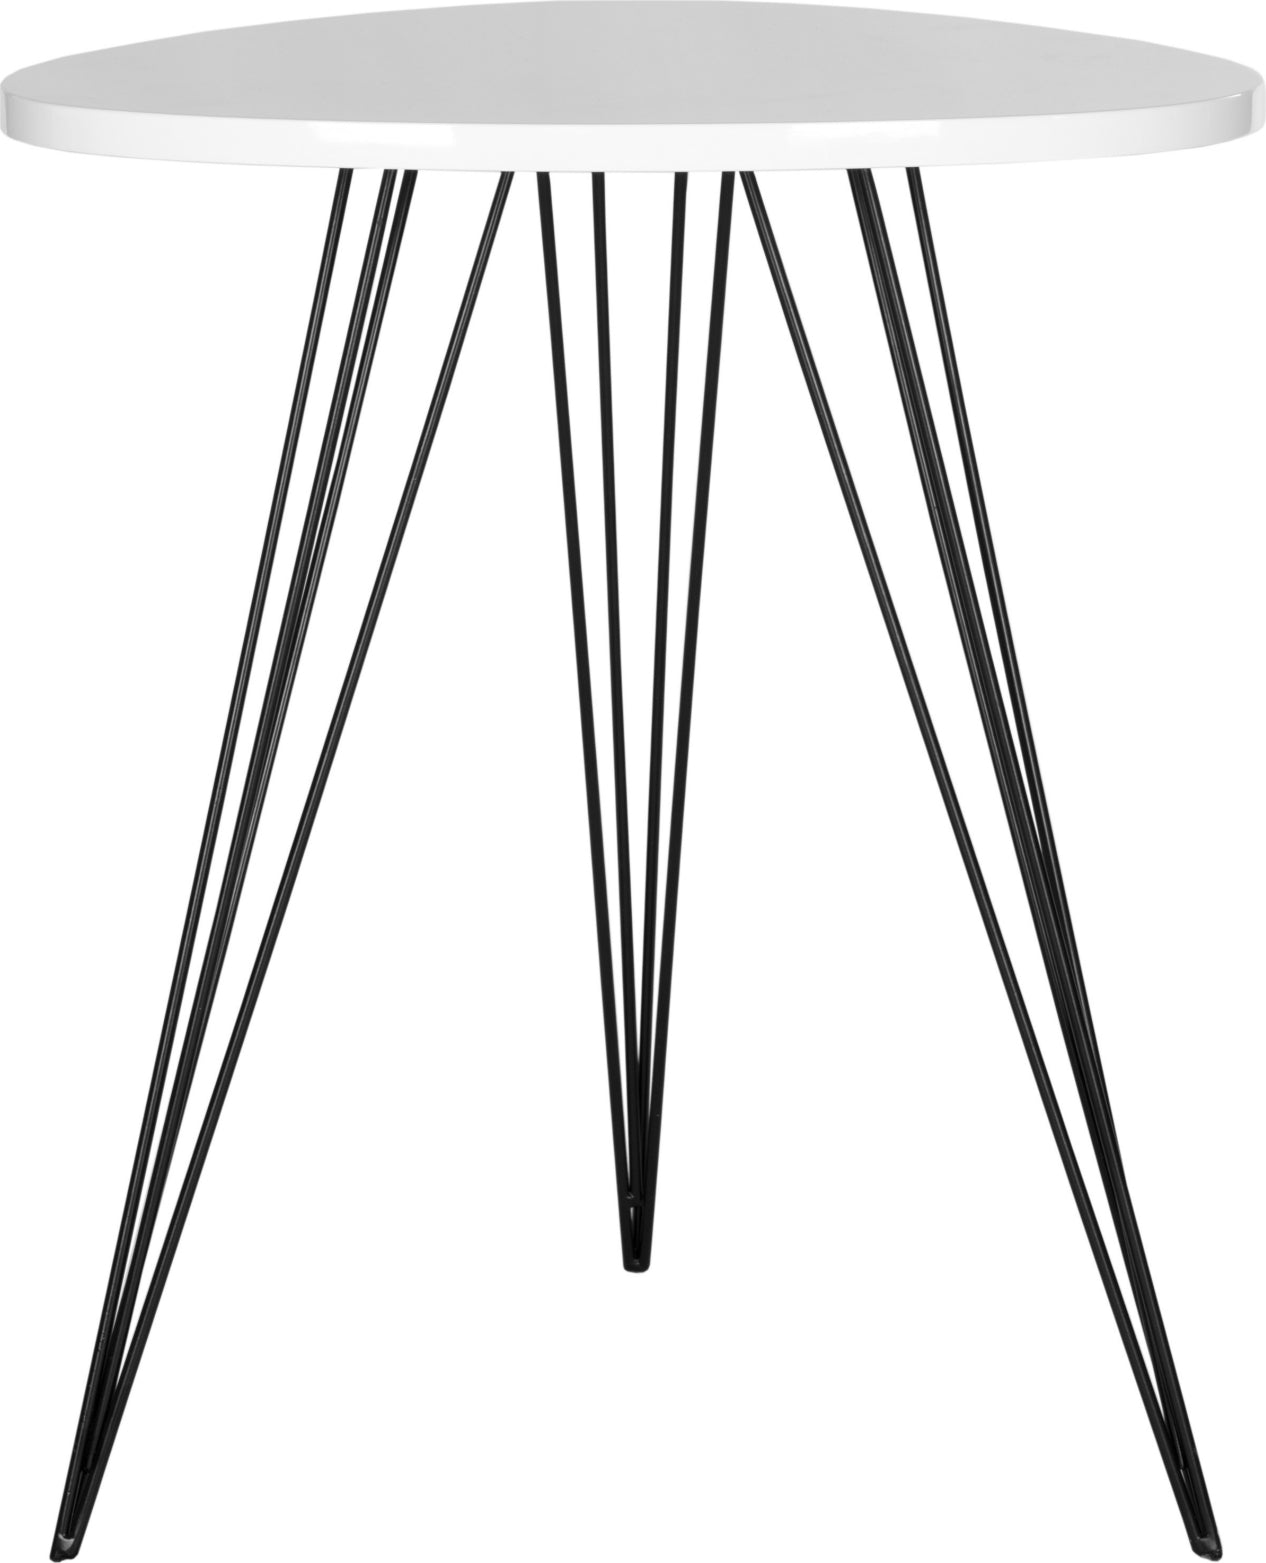 Safavieh Wolcott Retro Mid Century Lacquer Side Table White and Black Furniture main image